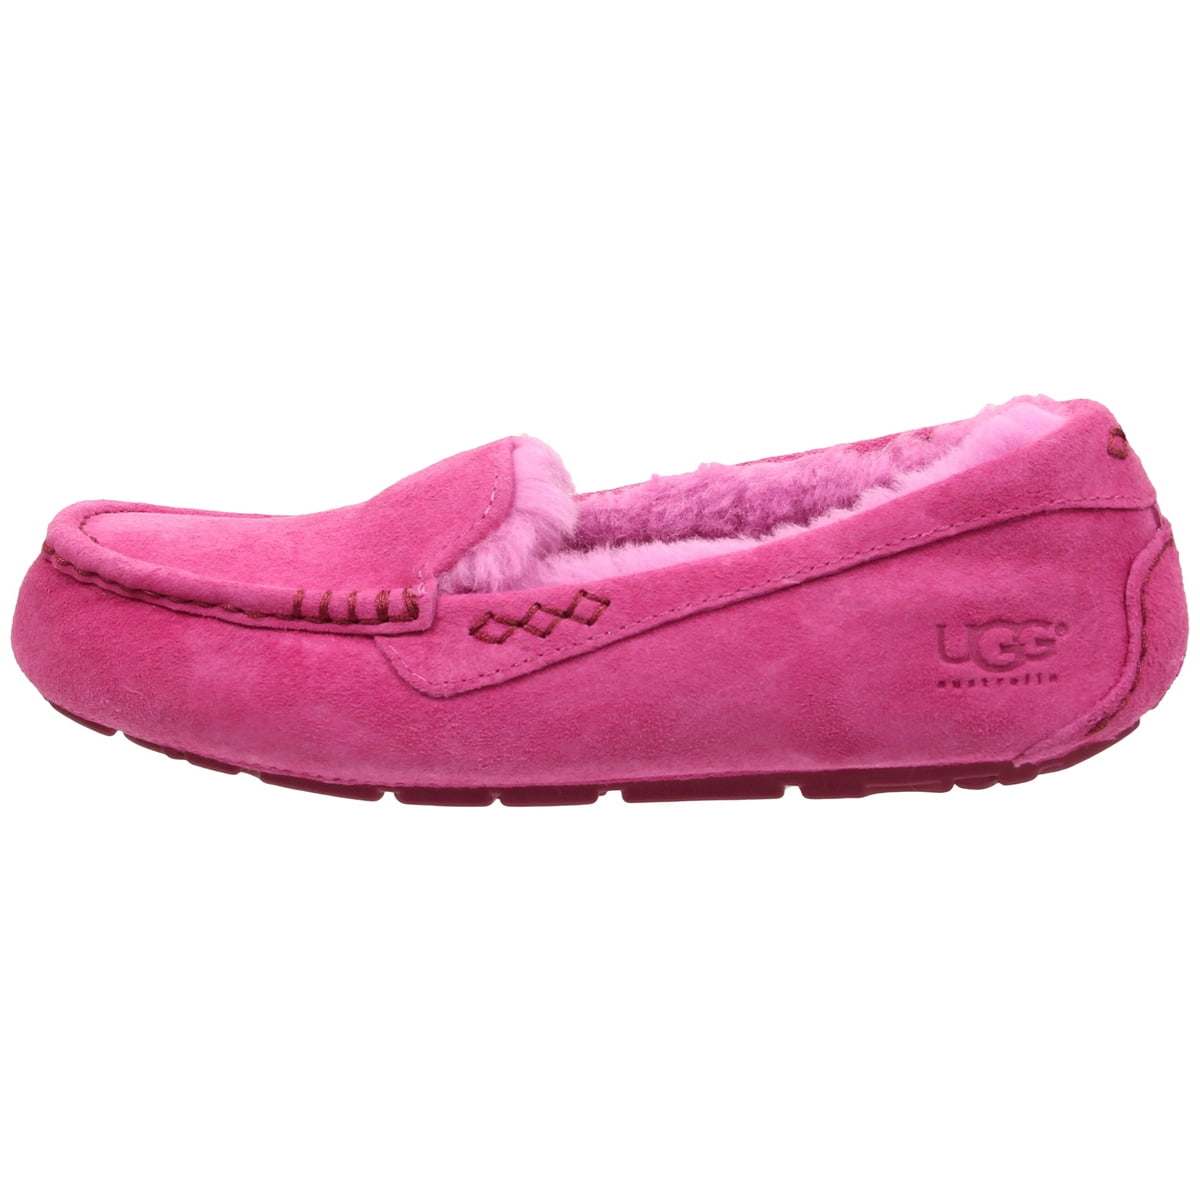 ugg ansley slippers pink